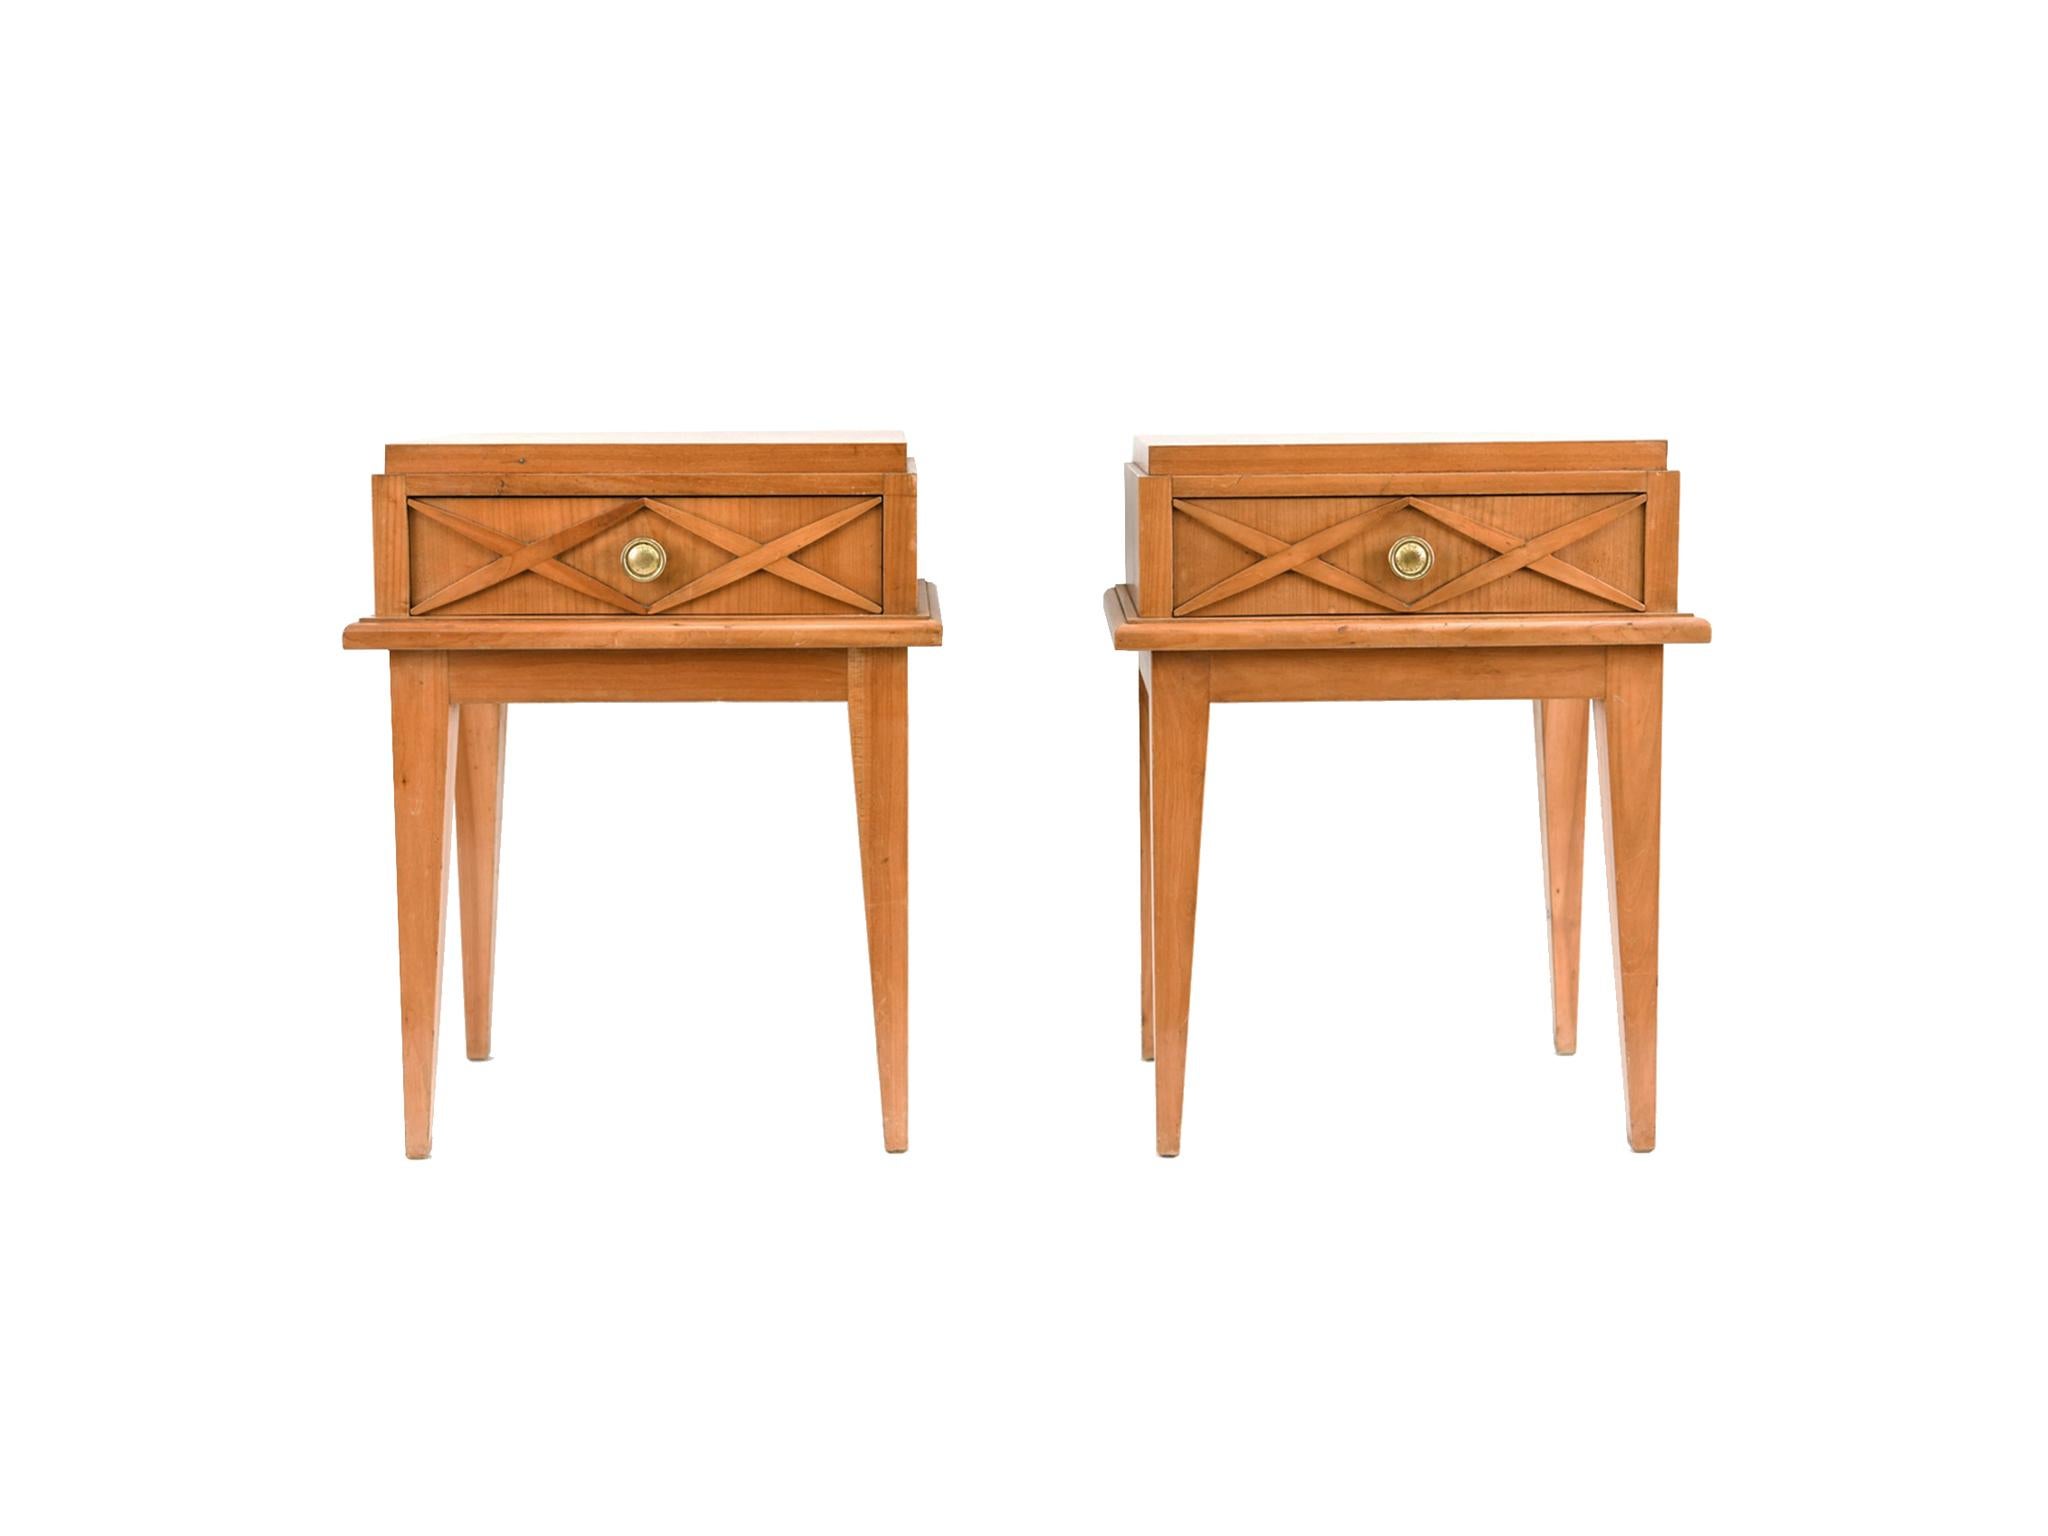 A finely crafted pair of side tables designed in the manner of Maison Gouffé, Paris. Manufactured in the 1950s. The tables are made of beechwood with brass pulls. Their design is in the spirit of neoclassical furniture: simplicity in form, symmetry,